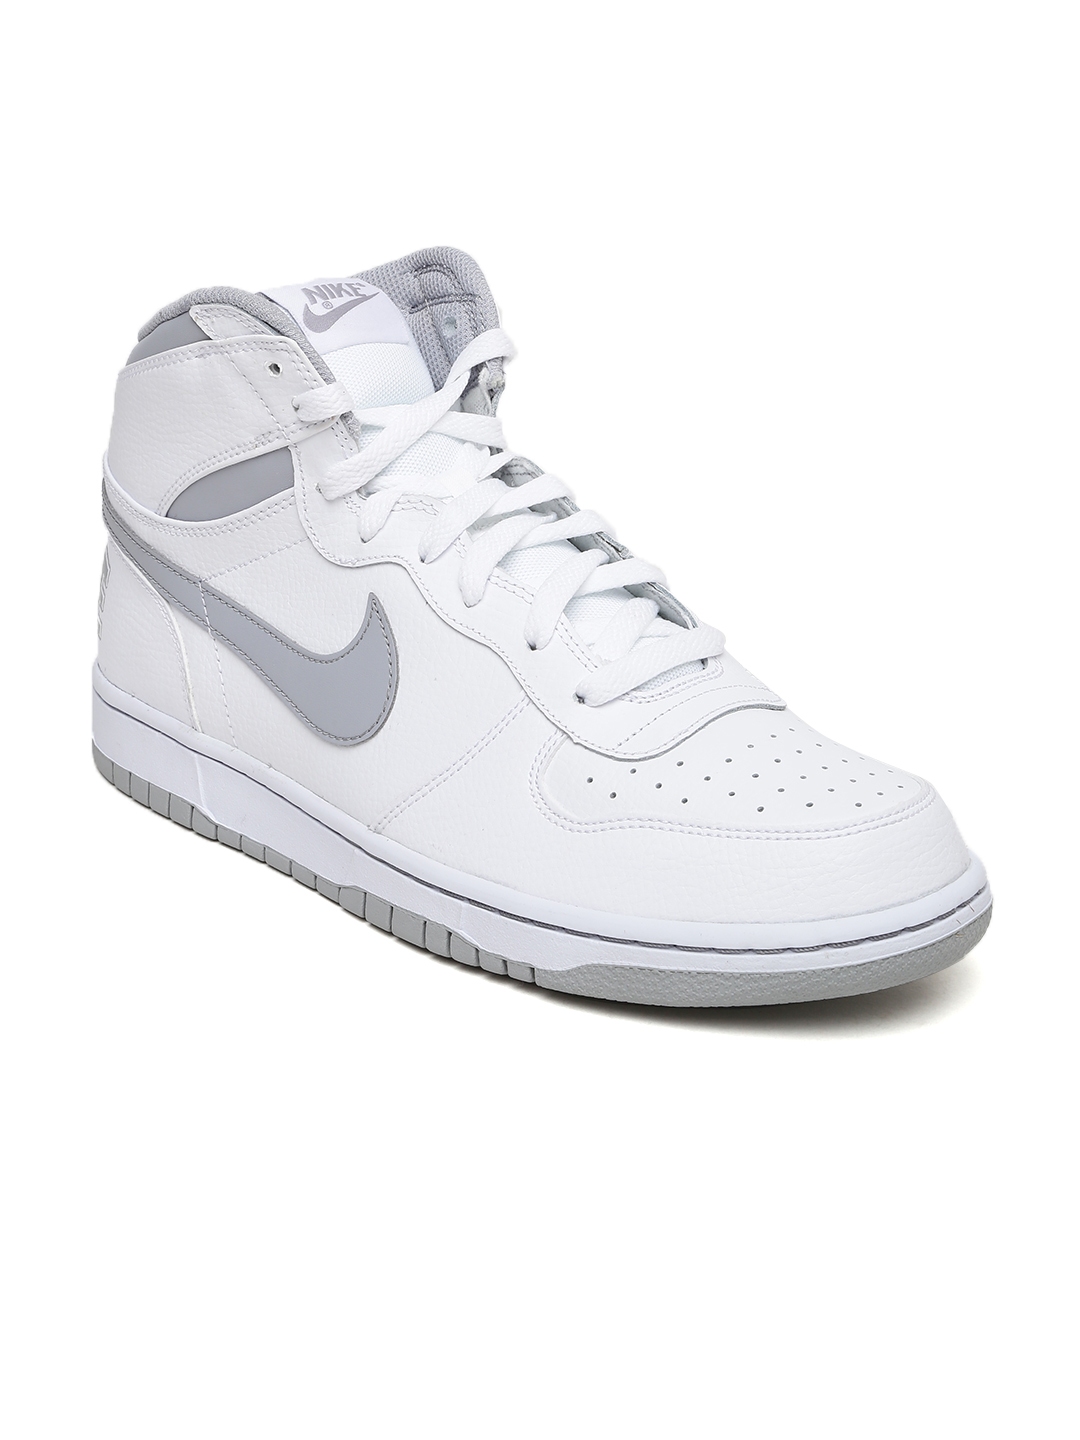 Buy Nike Men White Tops Sneakers - Shoes for 1547998 Myntra